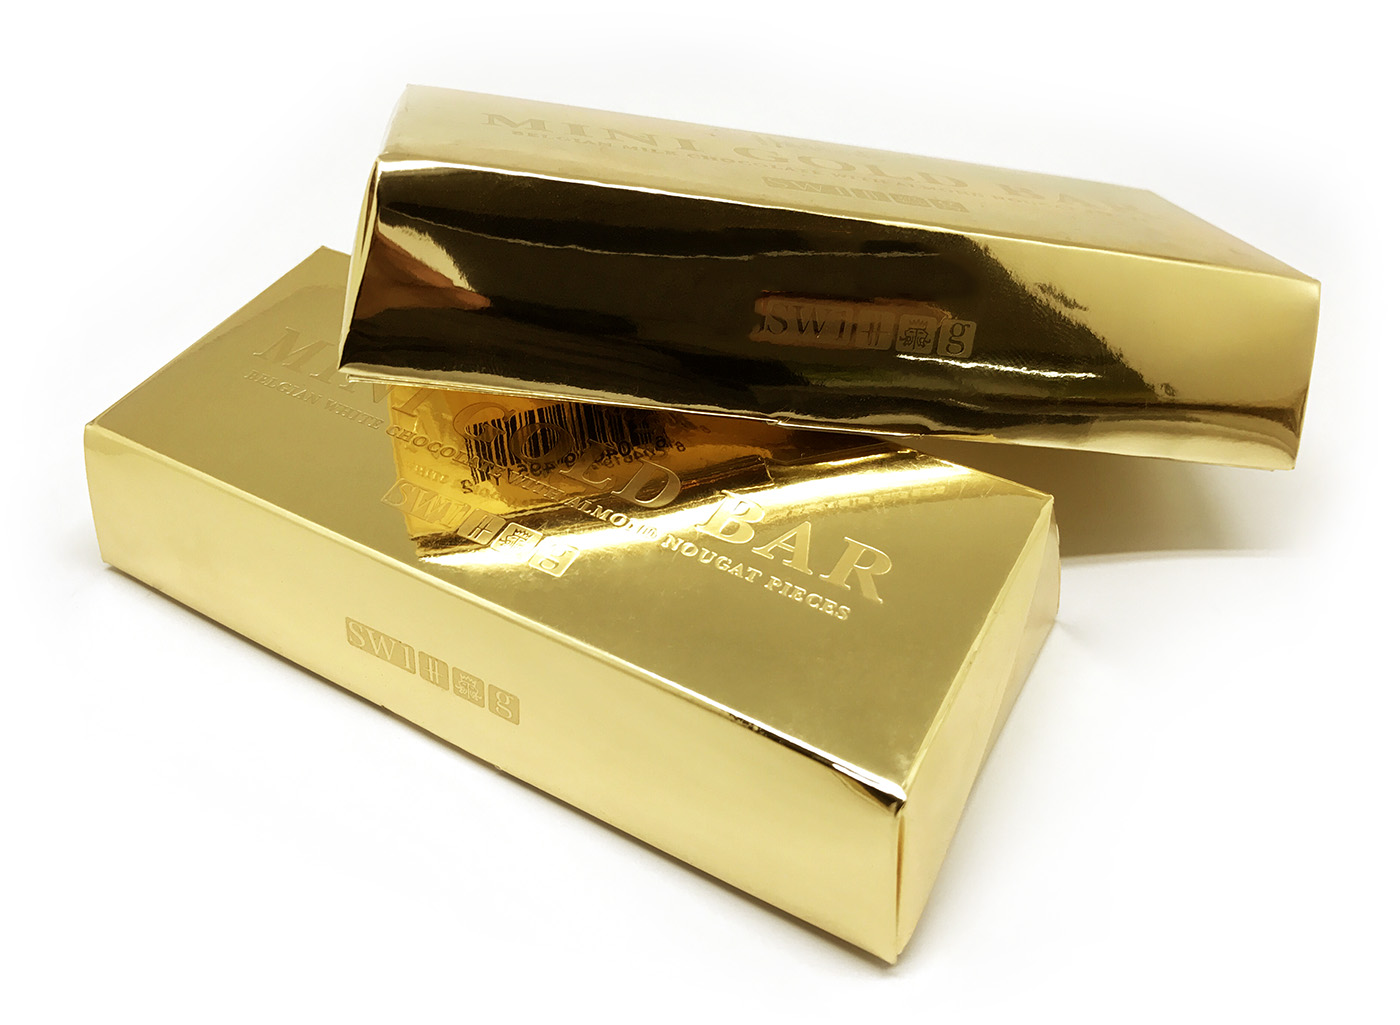 Harrods Gold Bar chocolate packaging